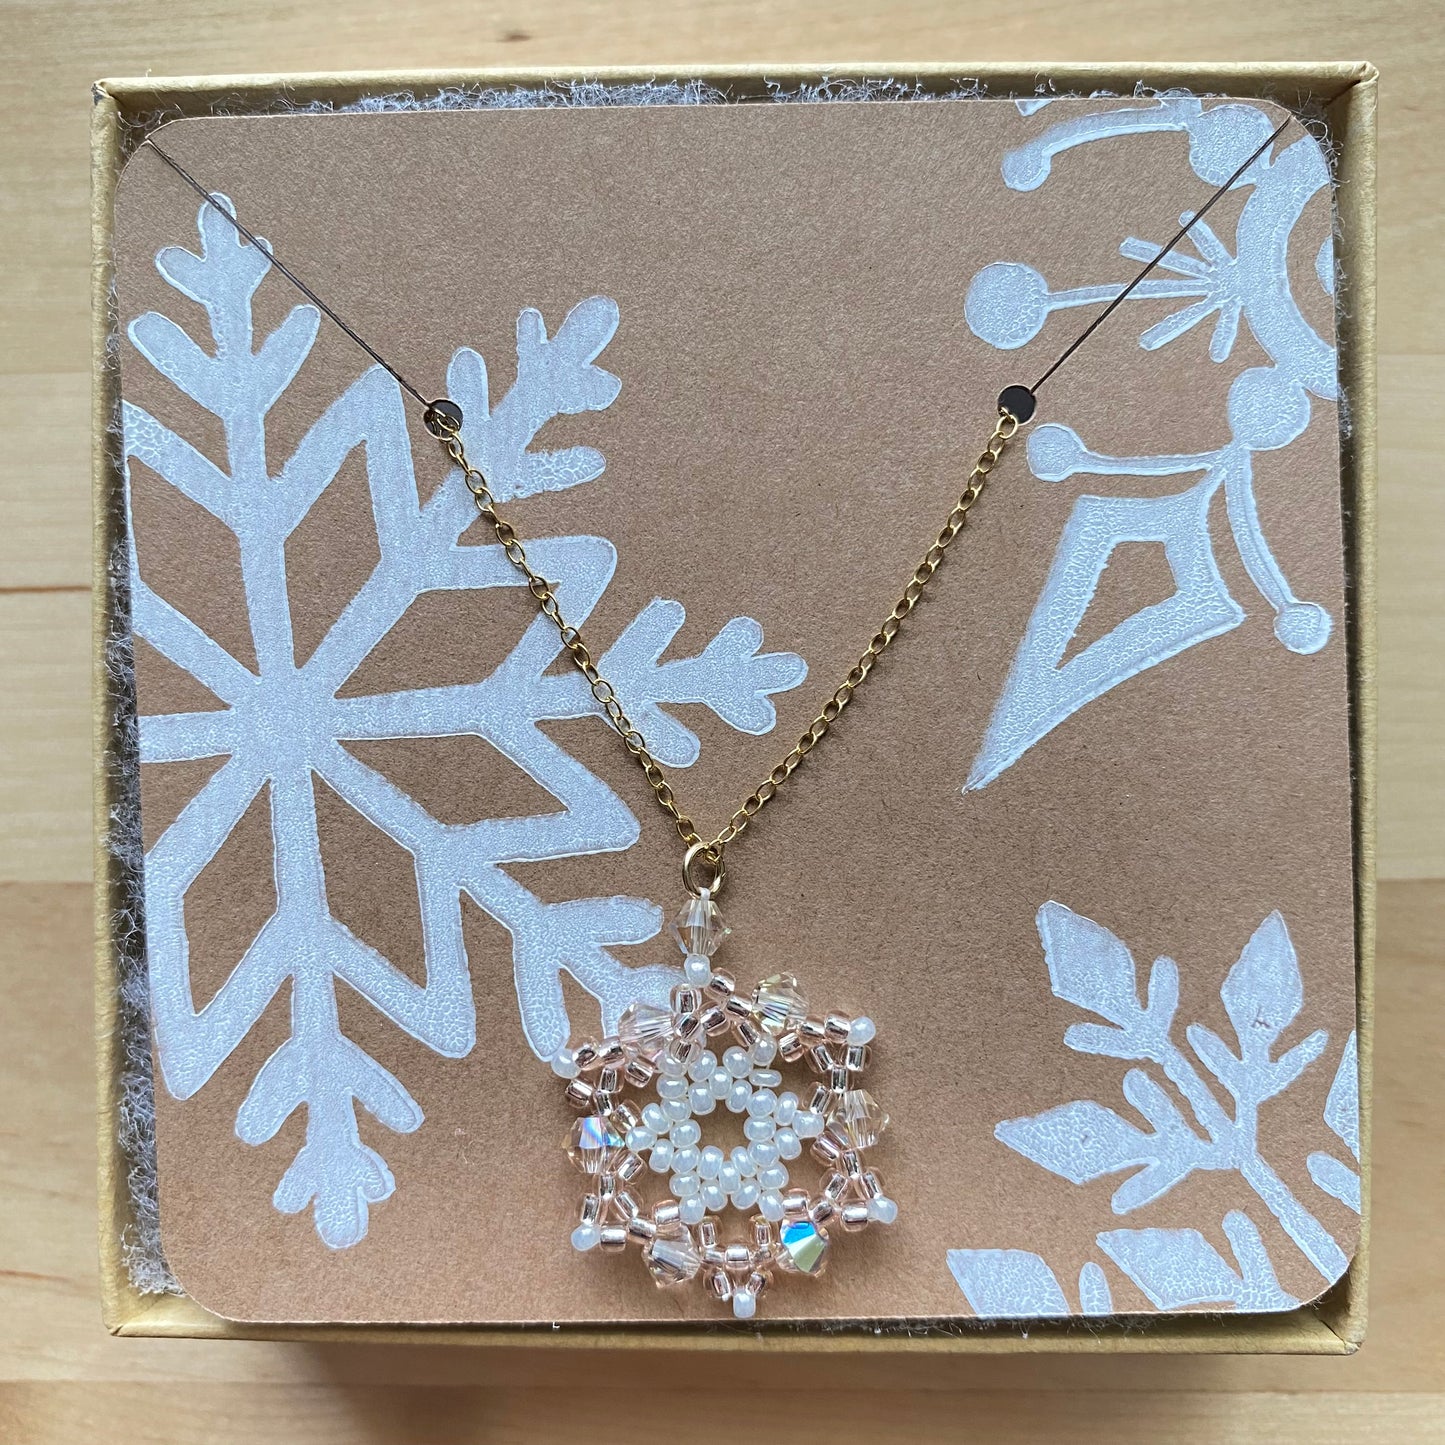 Light Silk & White Snowflake Crystal 14kt Gold Necklace